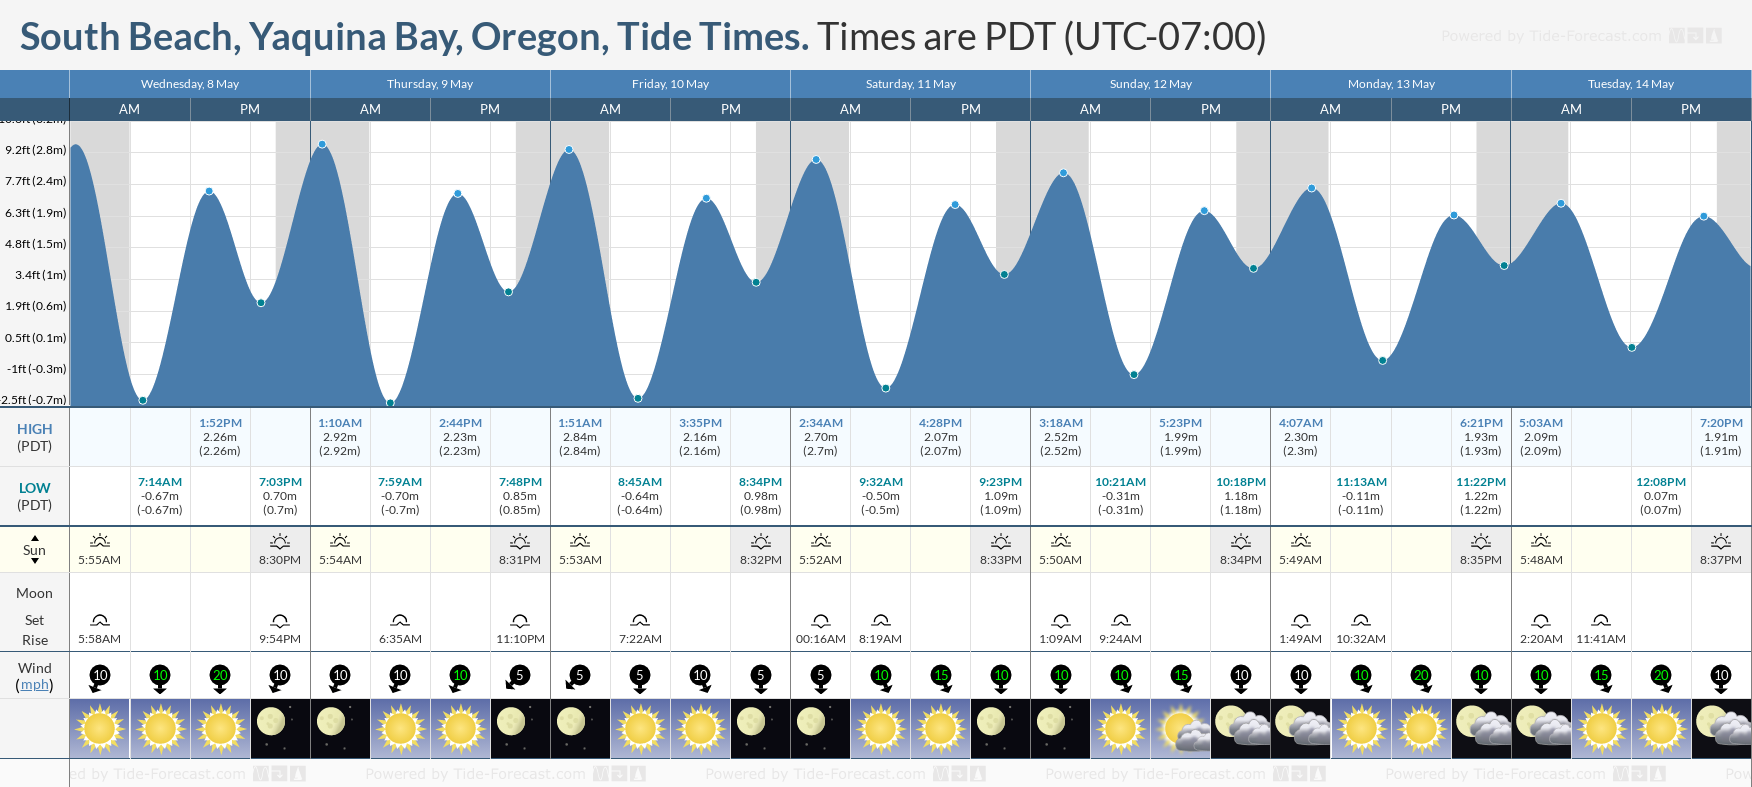 South Beach, Yaquina Bay, Oregon Tide Chart including high and low tide tide times for the next 7 days